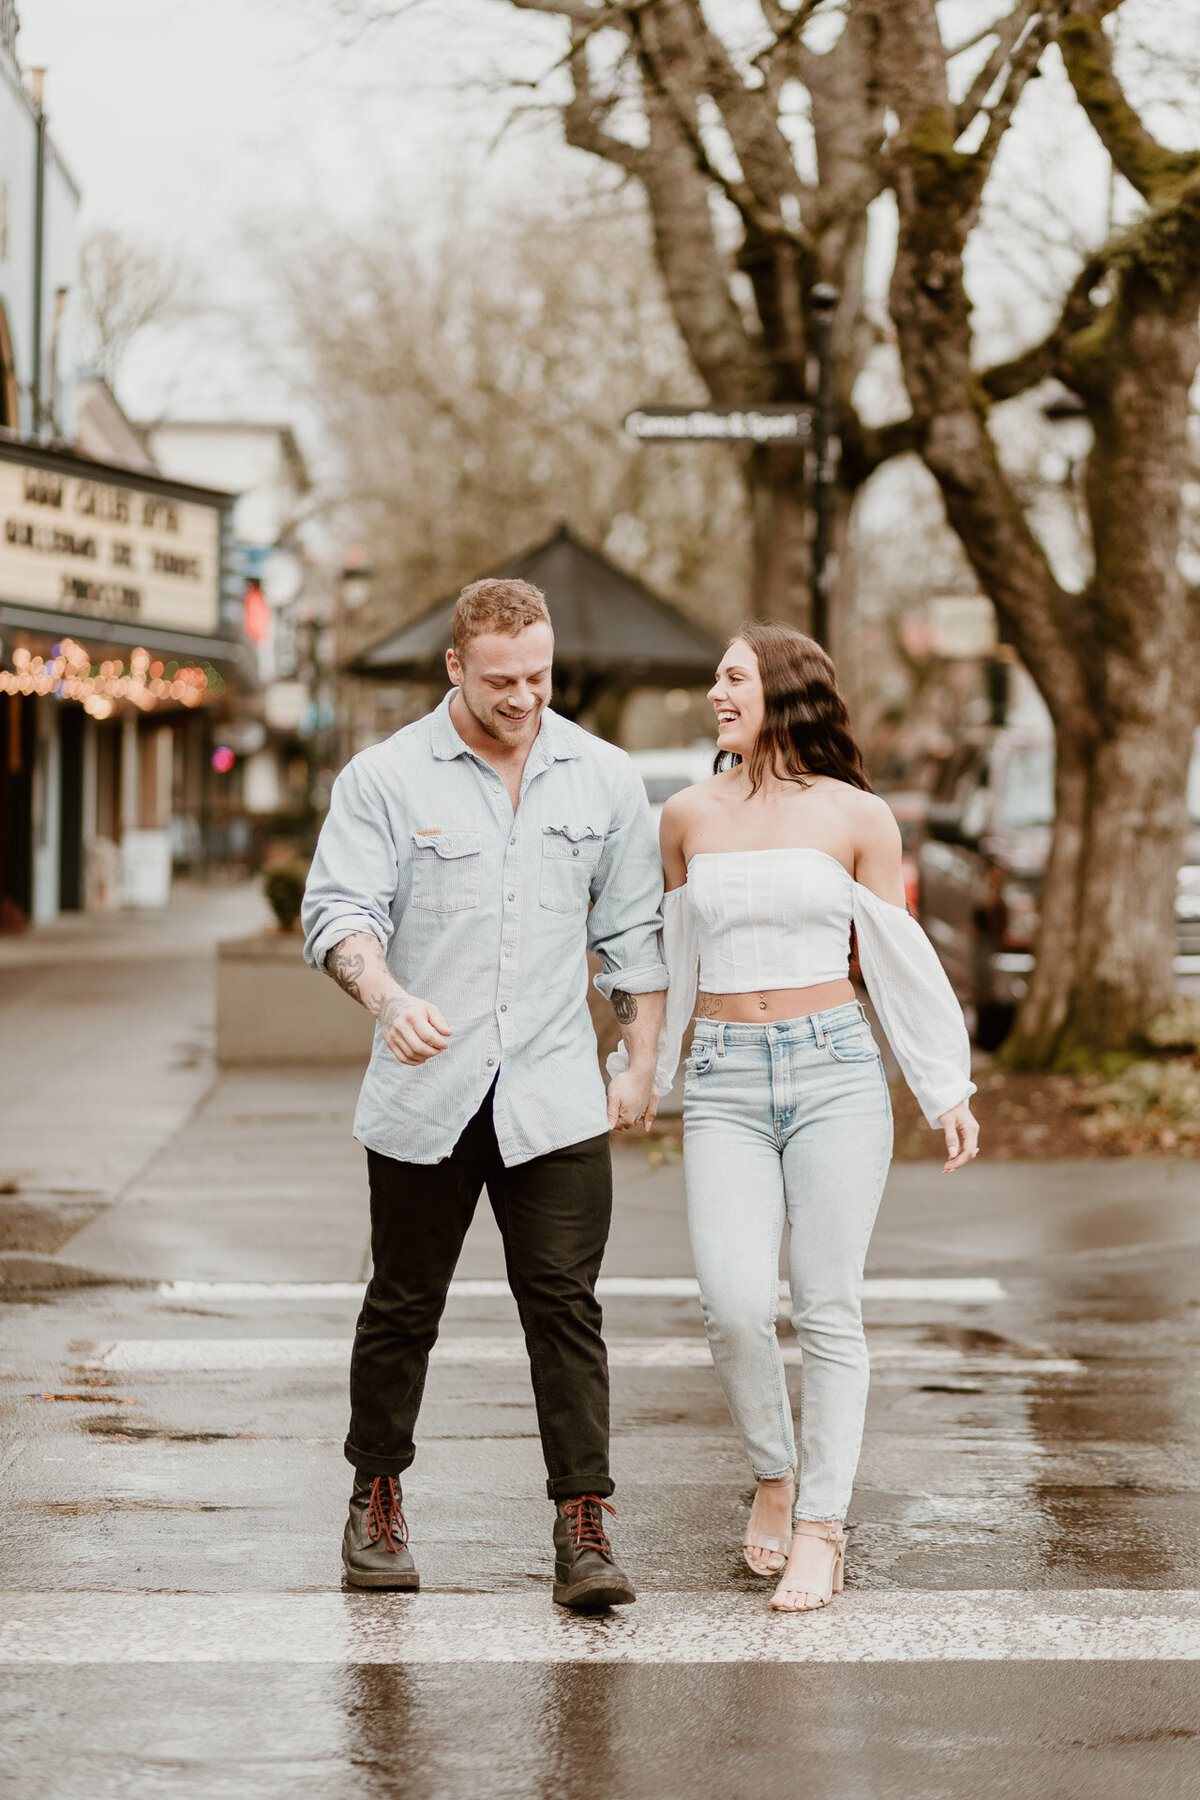 A newly engaged couple walks hand in hand through downtown while laughing